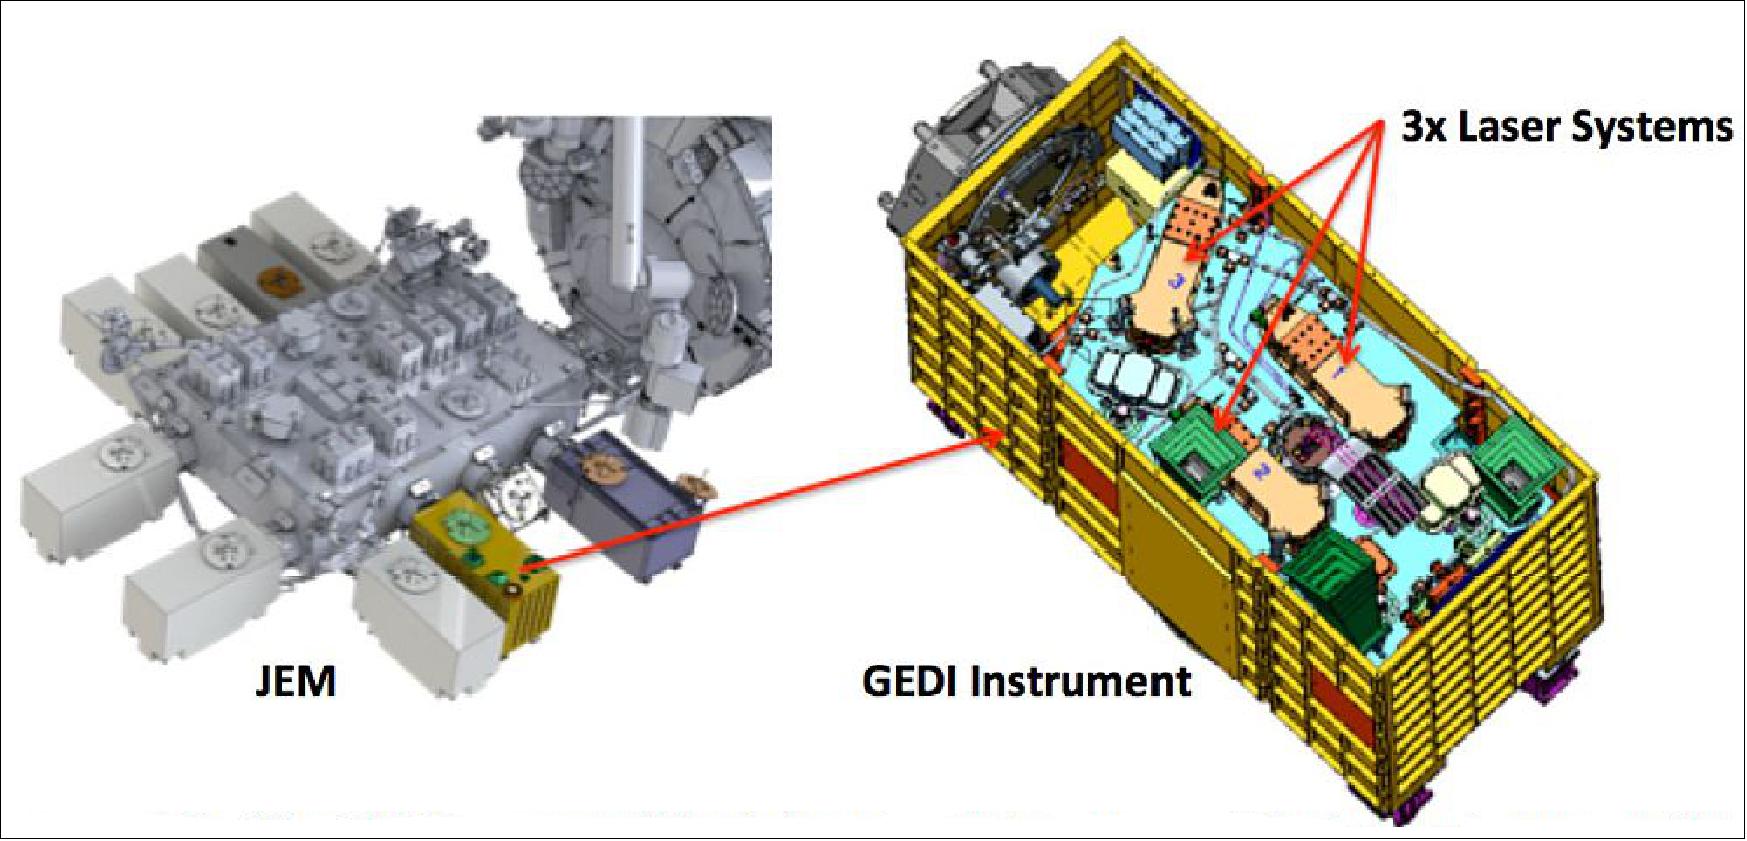 Figure 21: The GEDI lasers will be integrated onto the GEDI Instrument, seen on the right. This will be delivered to the JEM on the ISS module, seem on the left (image credit: NASA)